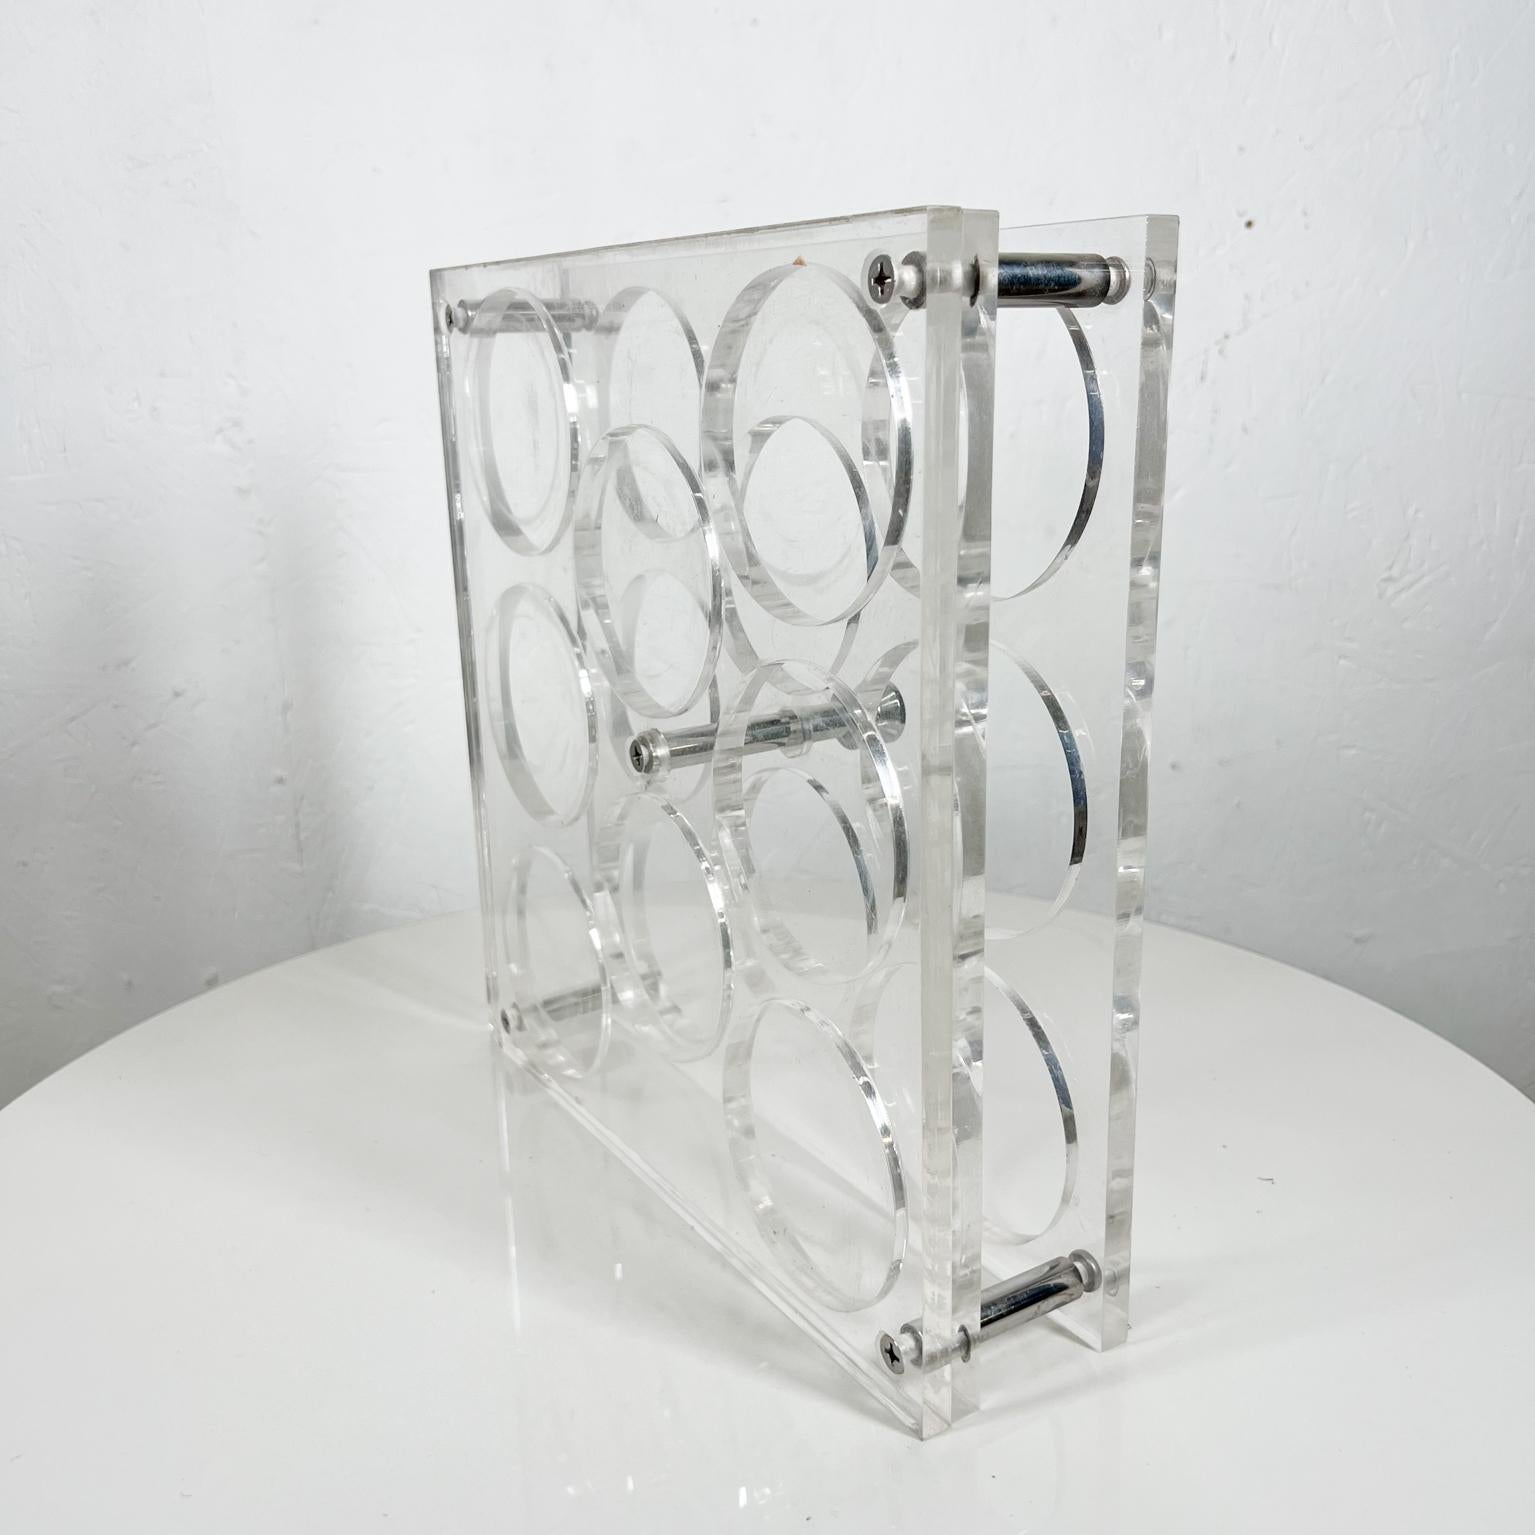 1970s Modernist Lucite Beverage Bar Drink Carrier Eight Glass Serving Tray 4